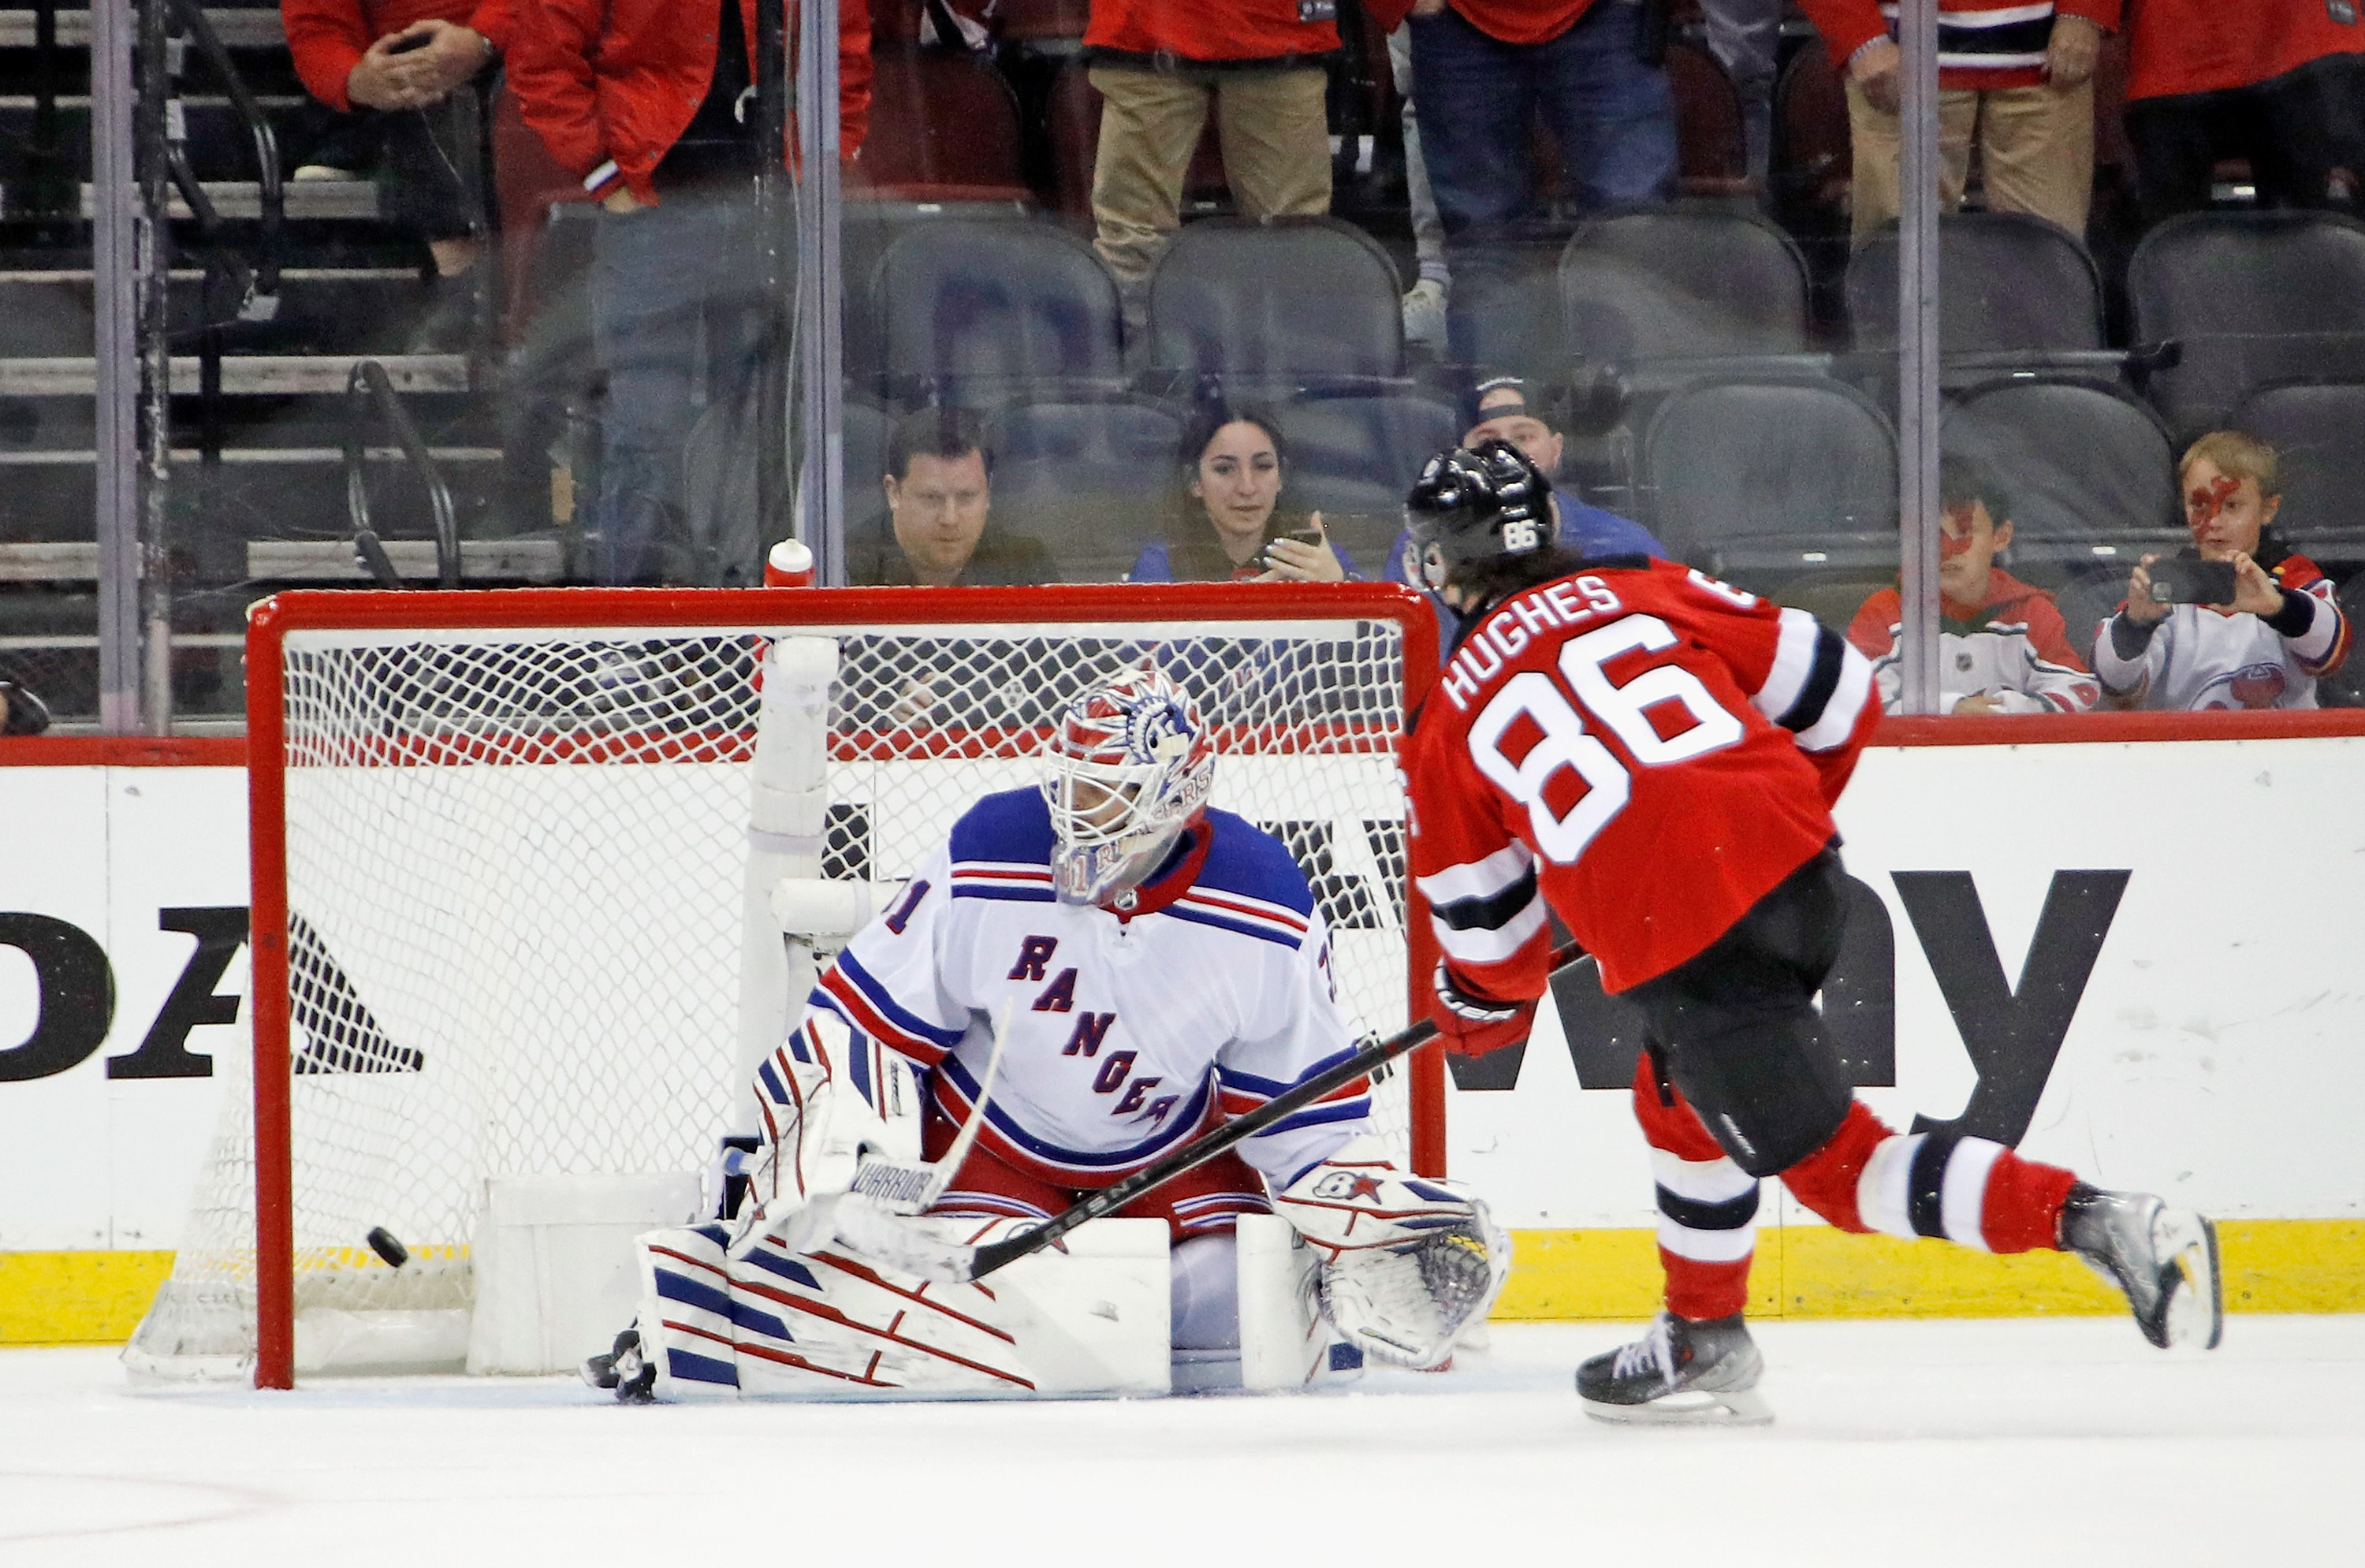 New York Rangers at New Jersey Devils - Game One